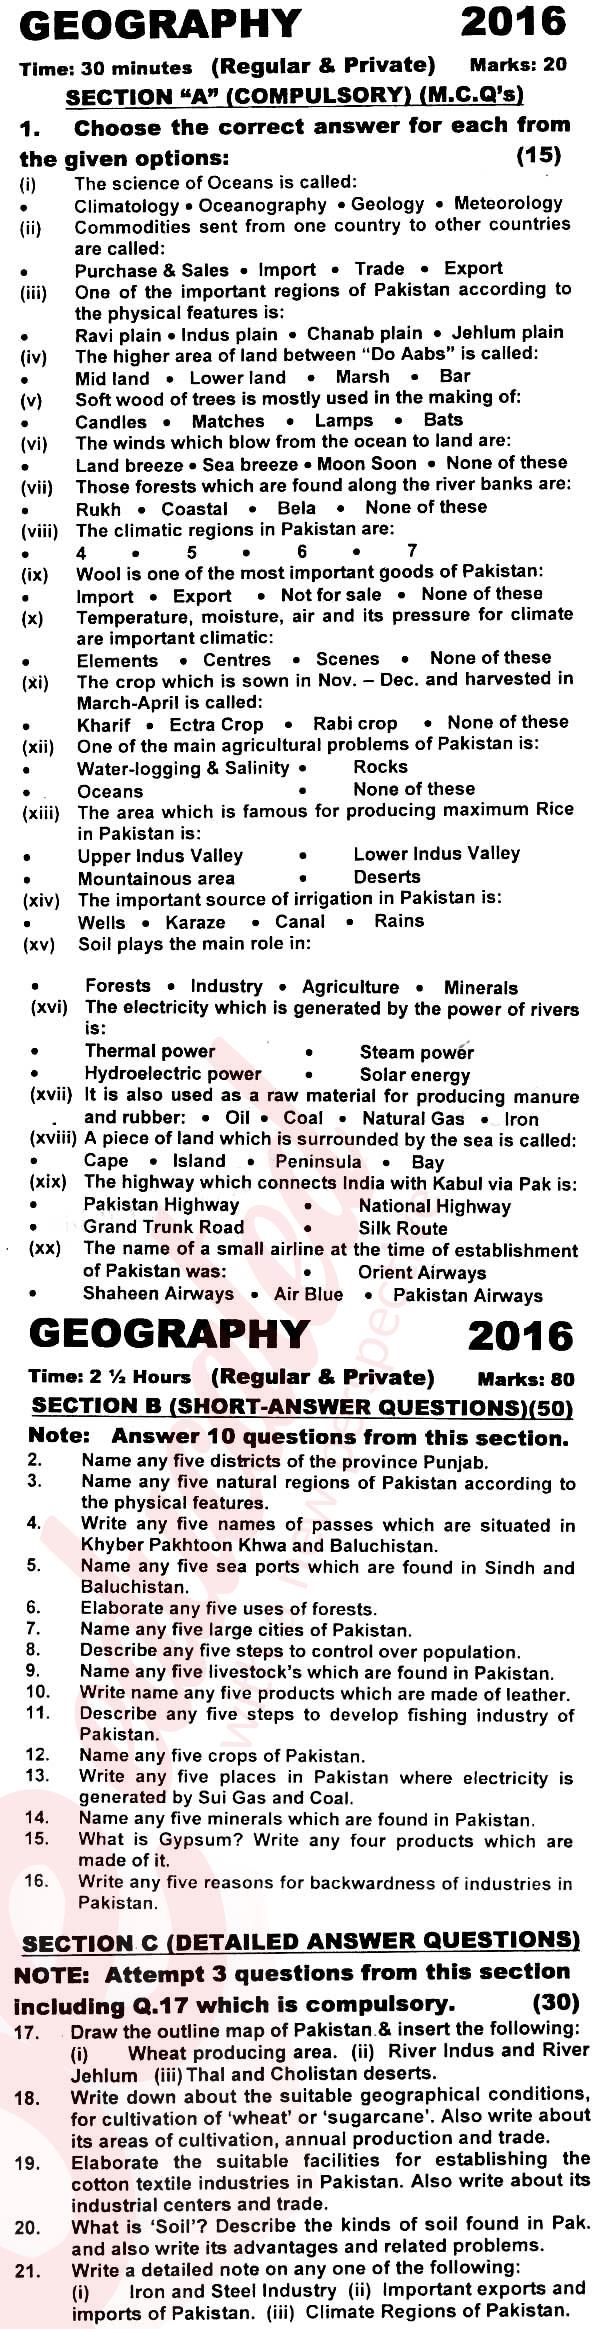 Commercial Geography 10th English Medium Past Paper Group 1 KPBTE 2016